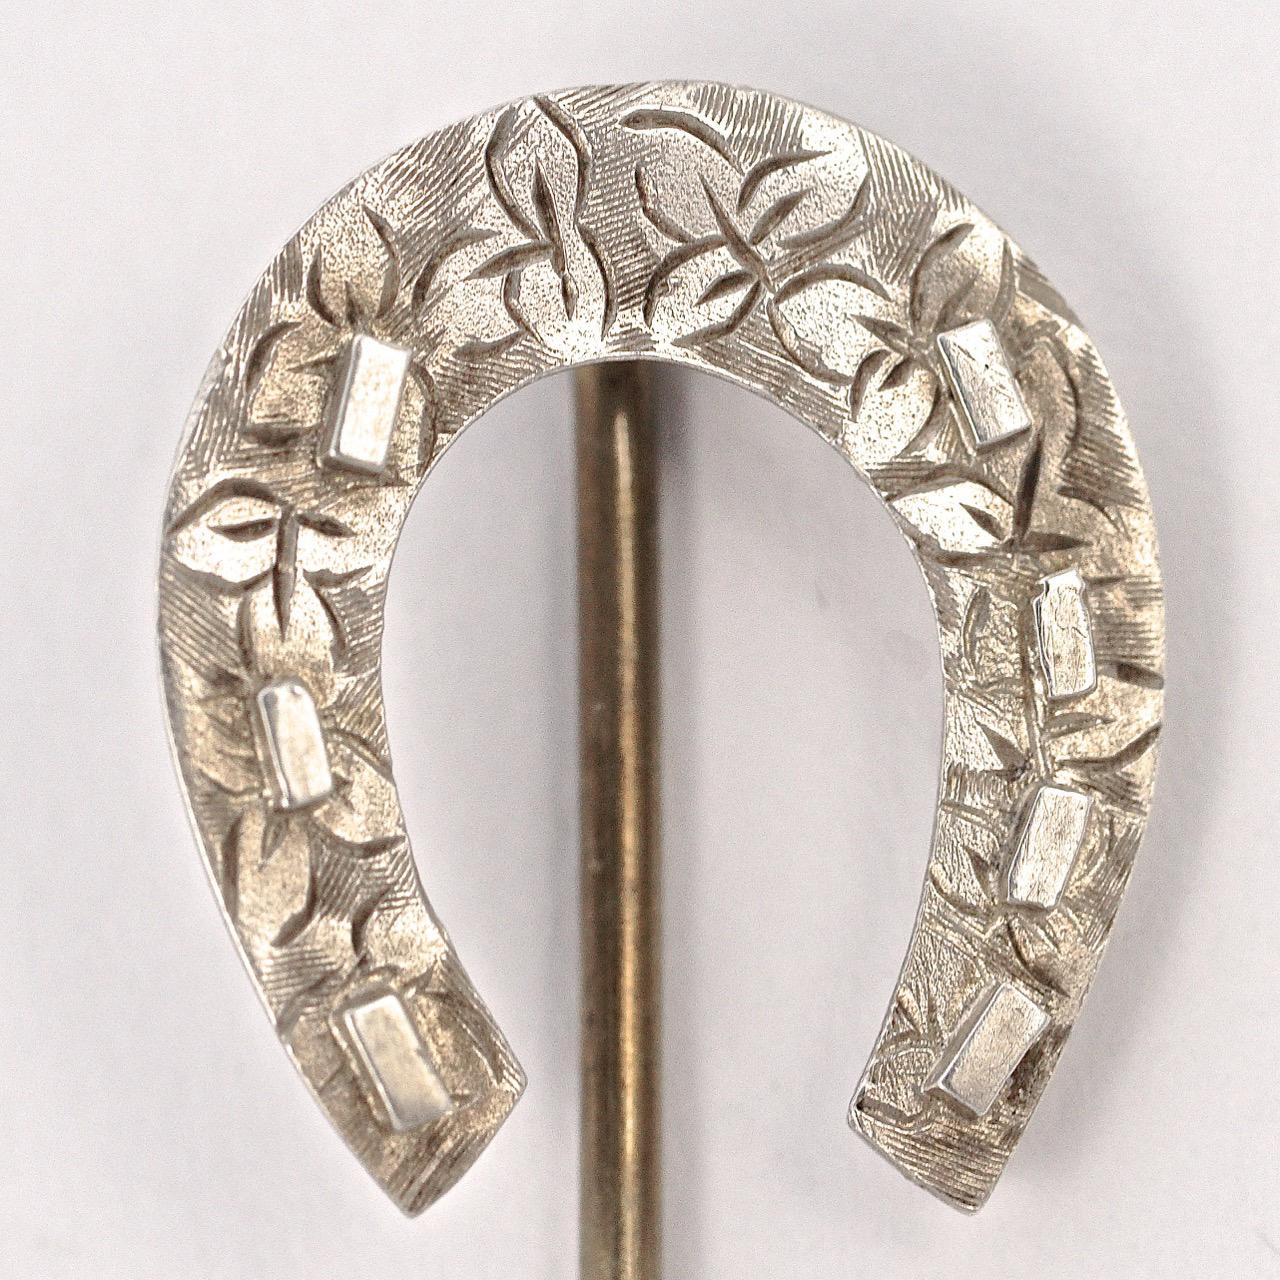 Wonderful antique Victorian sterling silver horseshoe stick pin, featuring a lovely floral hand engraved design. It has seven nails, four on one side and three on the other, seven being the luckiest number. The horseshoe is silver, the pin is not.